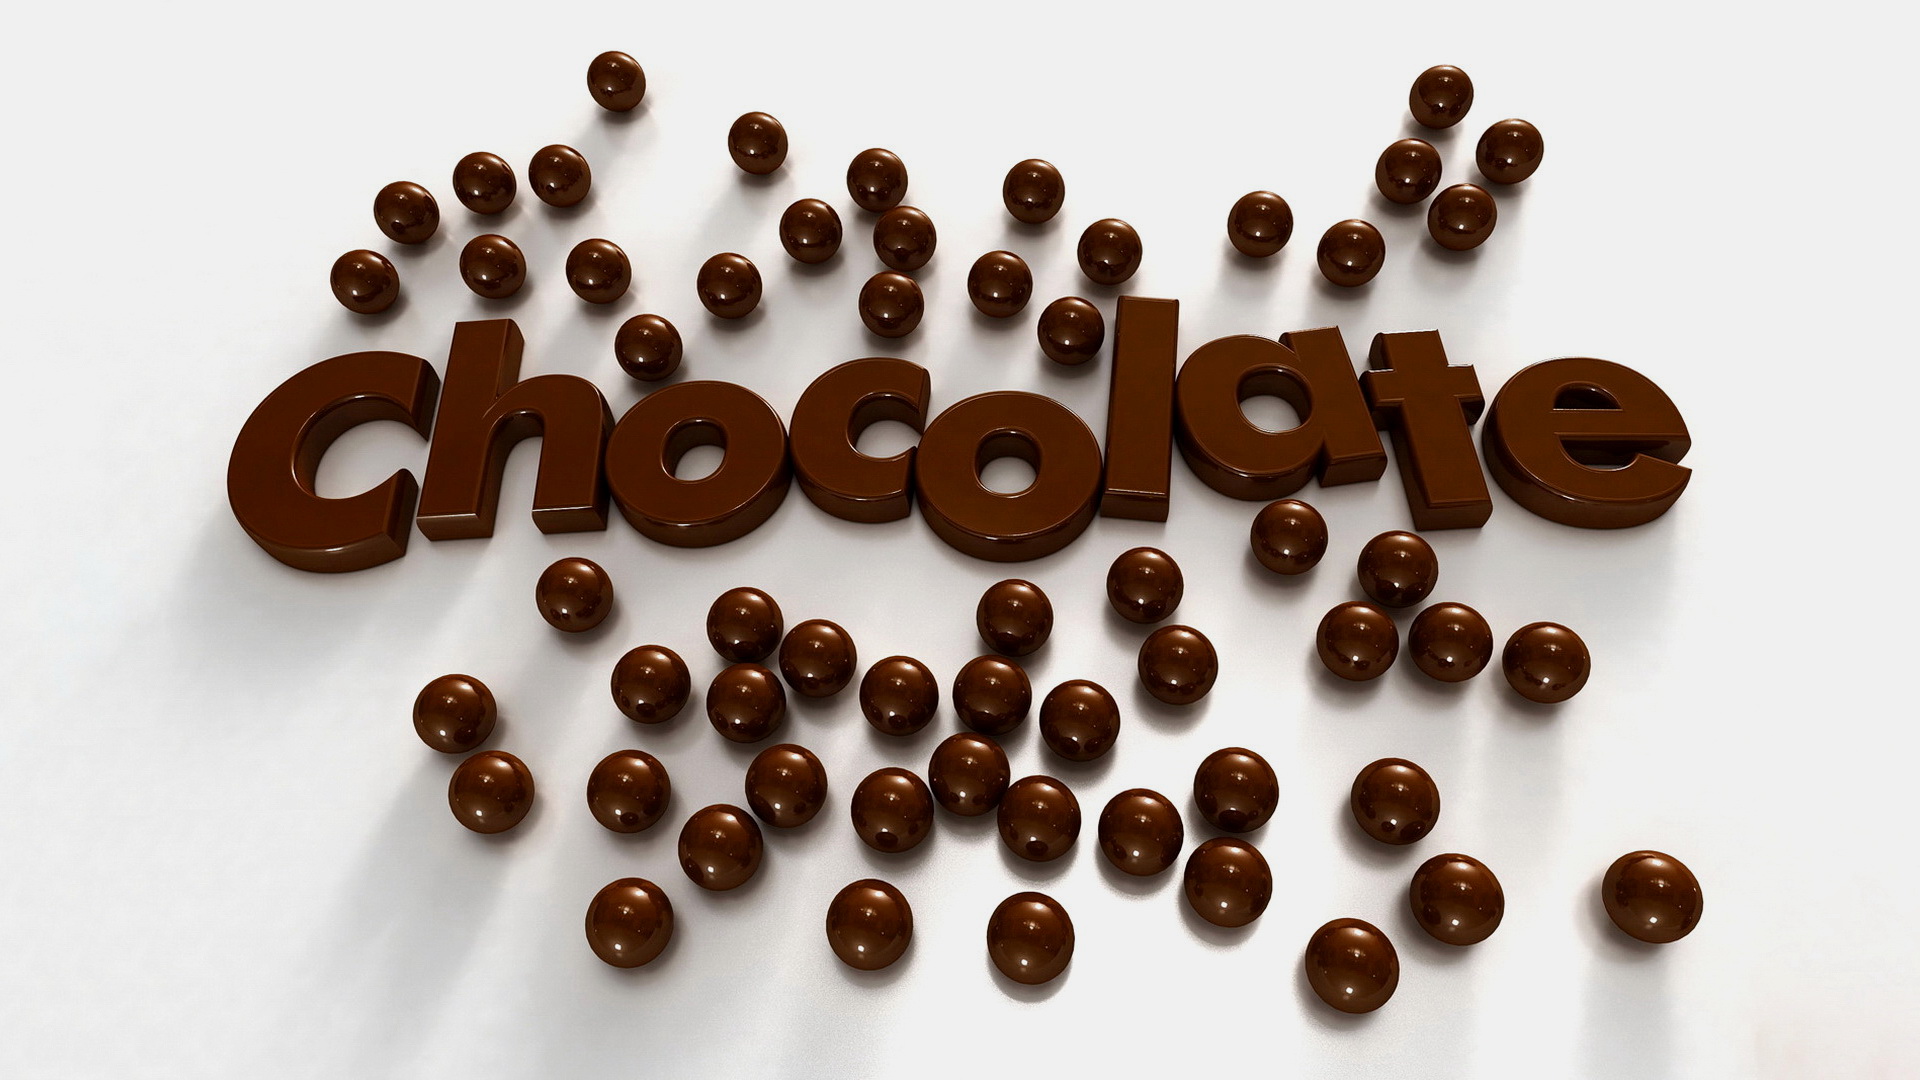 Free photo Chocolate lettering